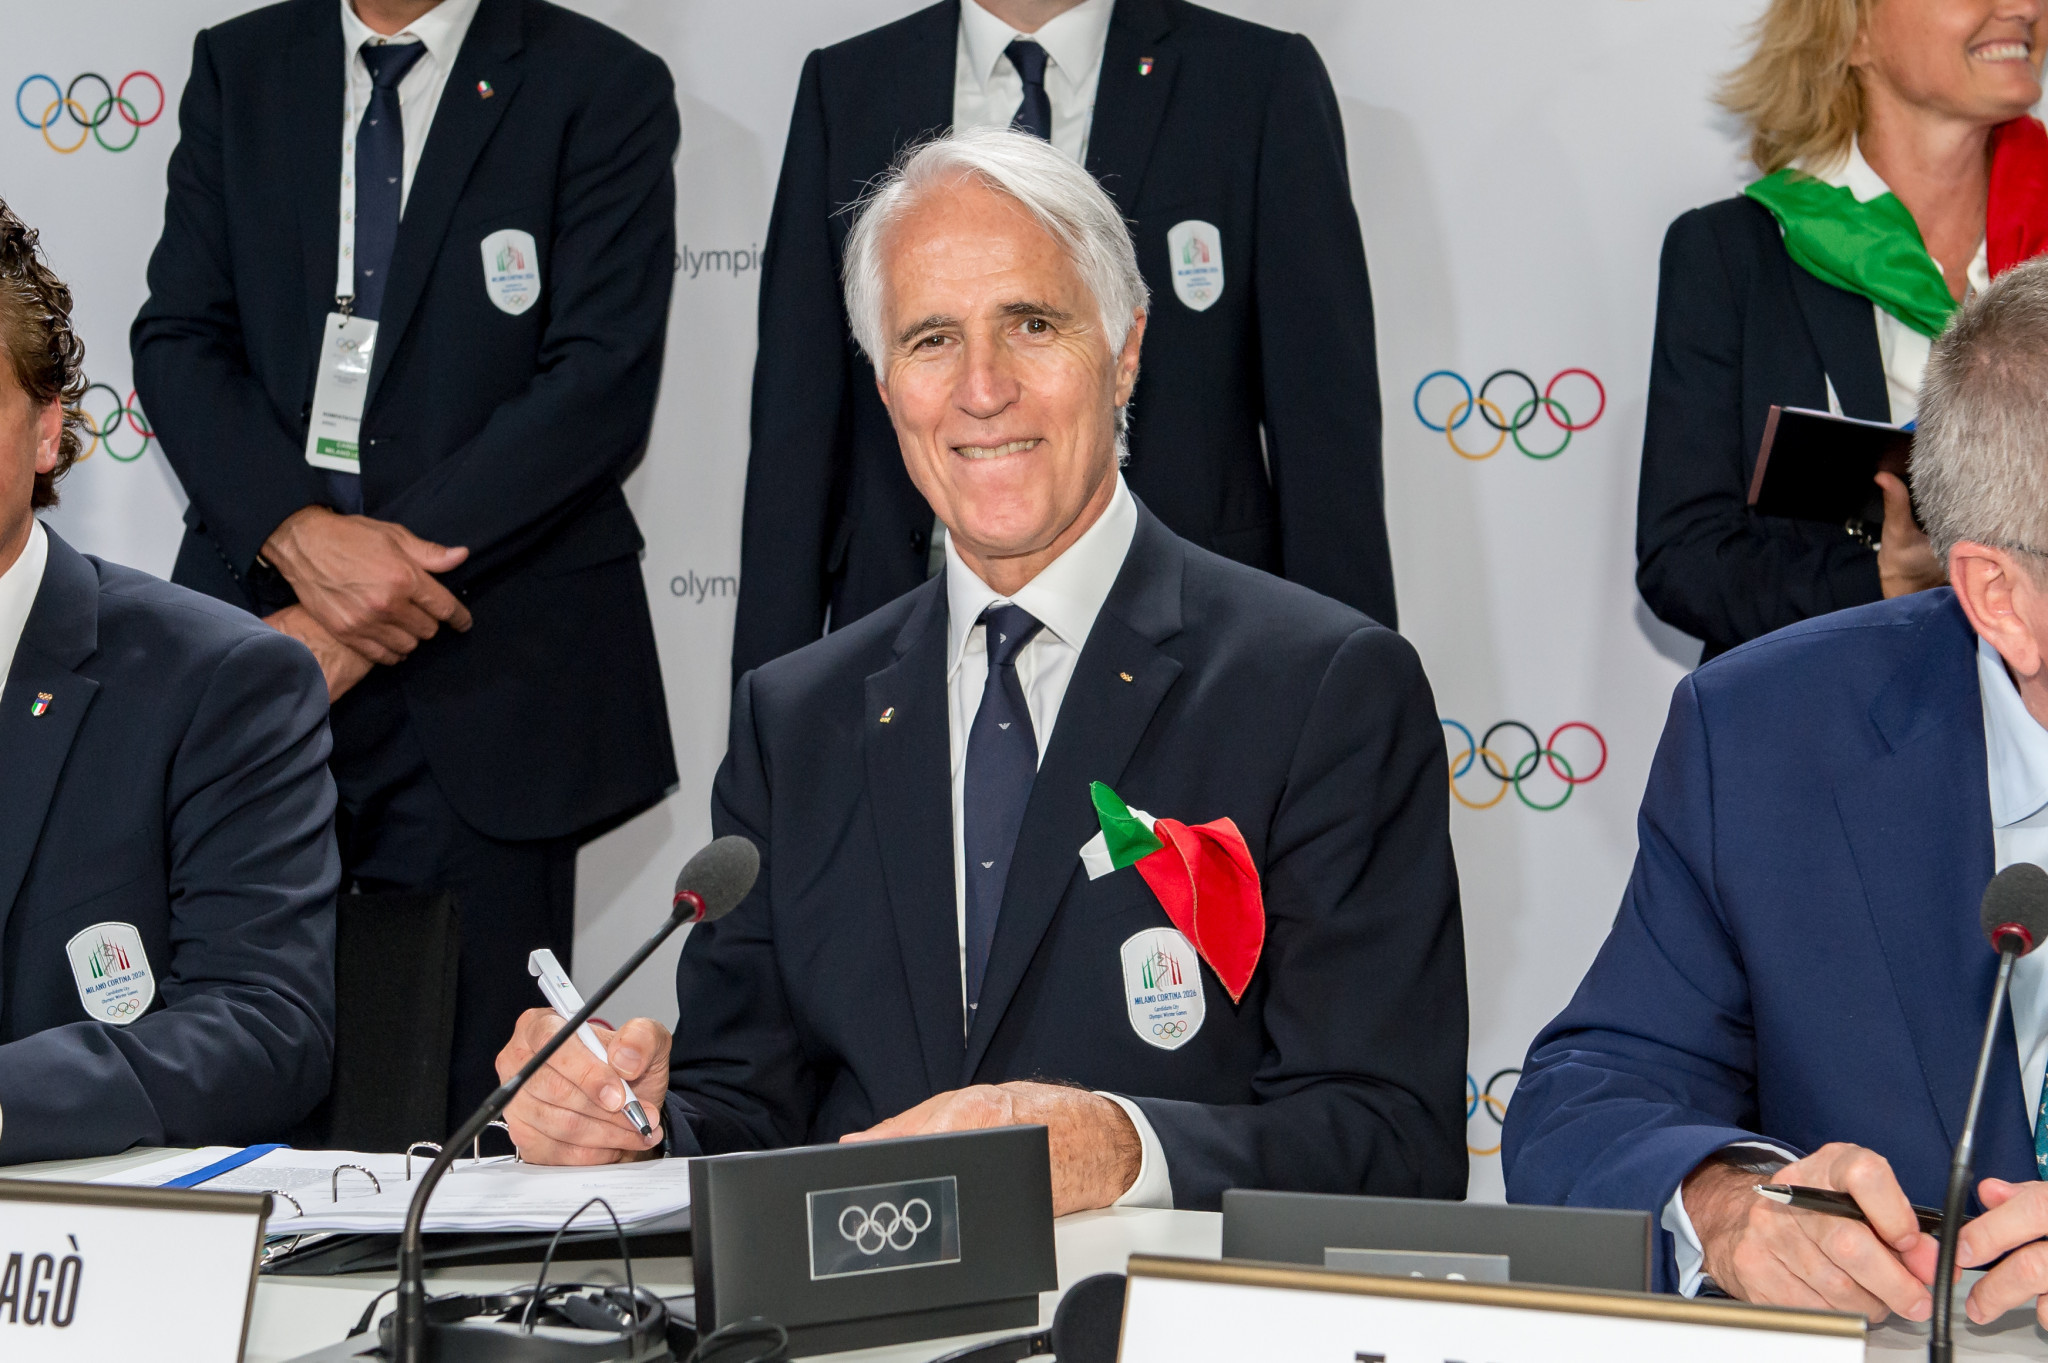 Malagò says Milan Cortina 2026 will be one of "lowest cost" Winter Olympics and Paralympics